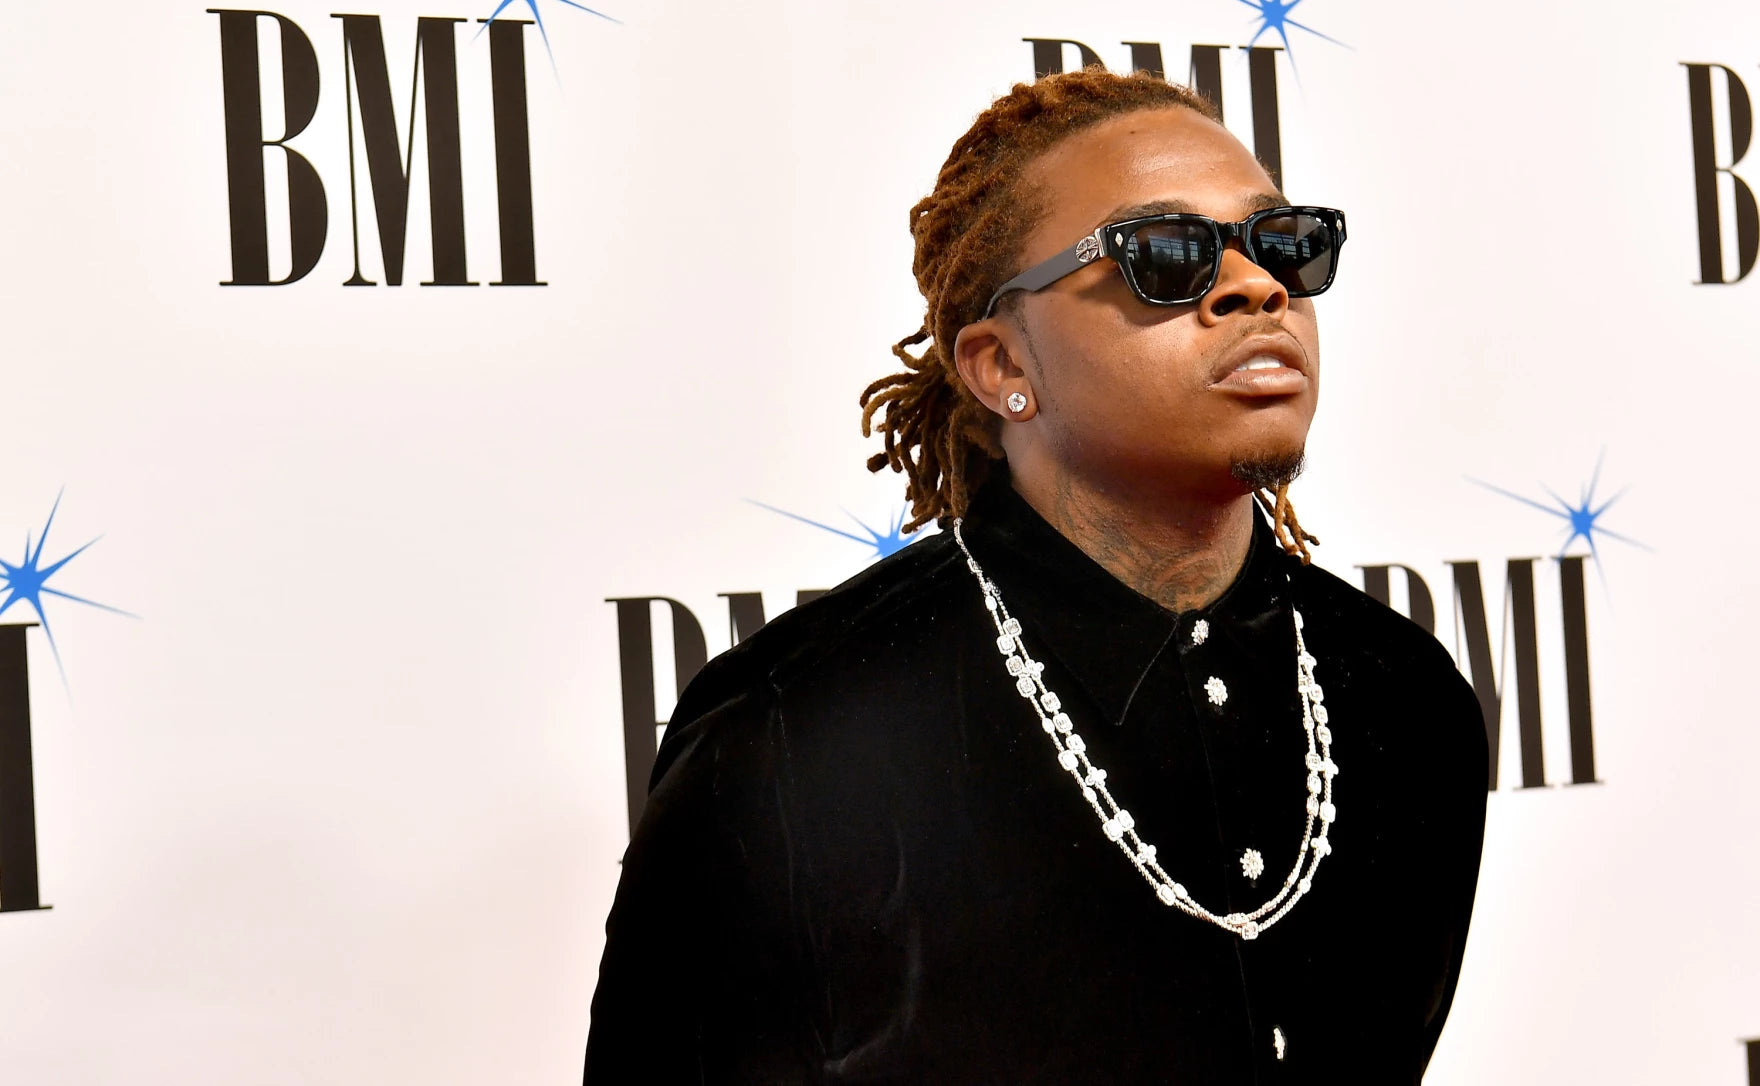 Making "rodeo dr" by Gunna from scratch